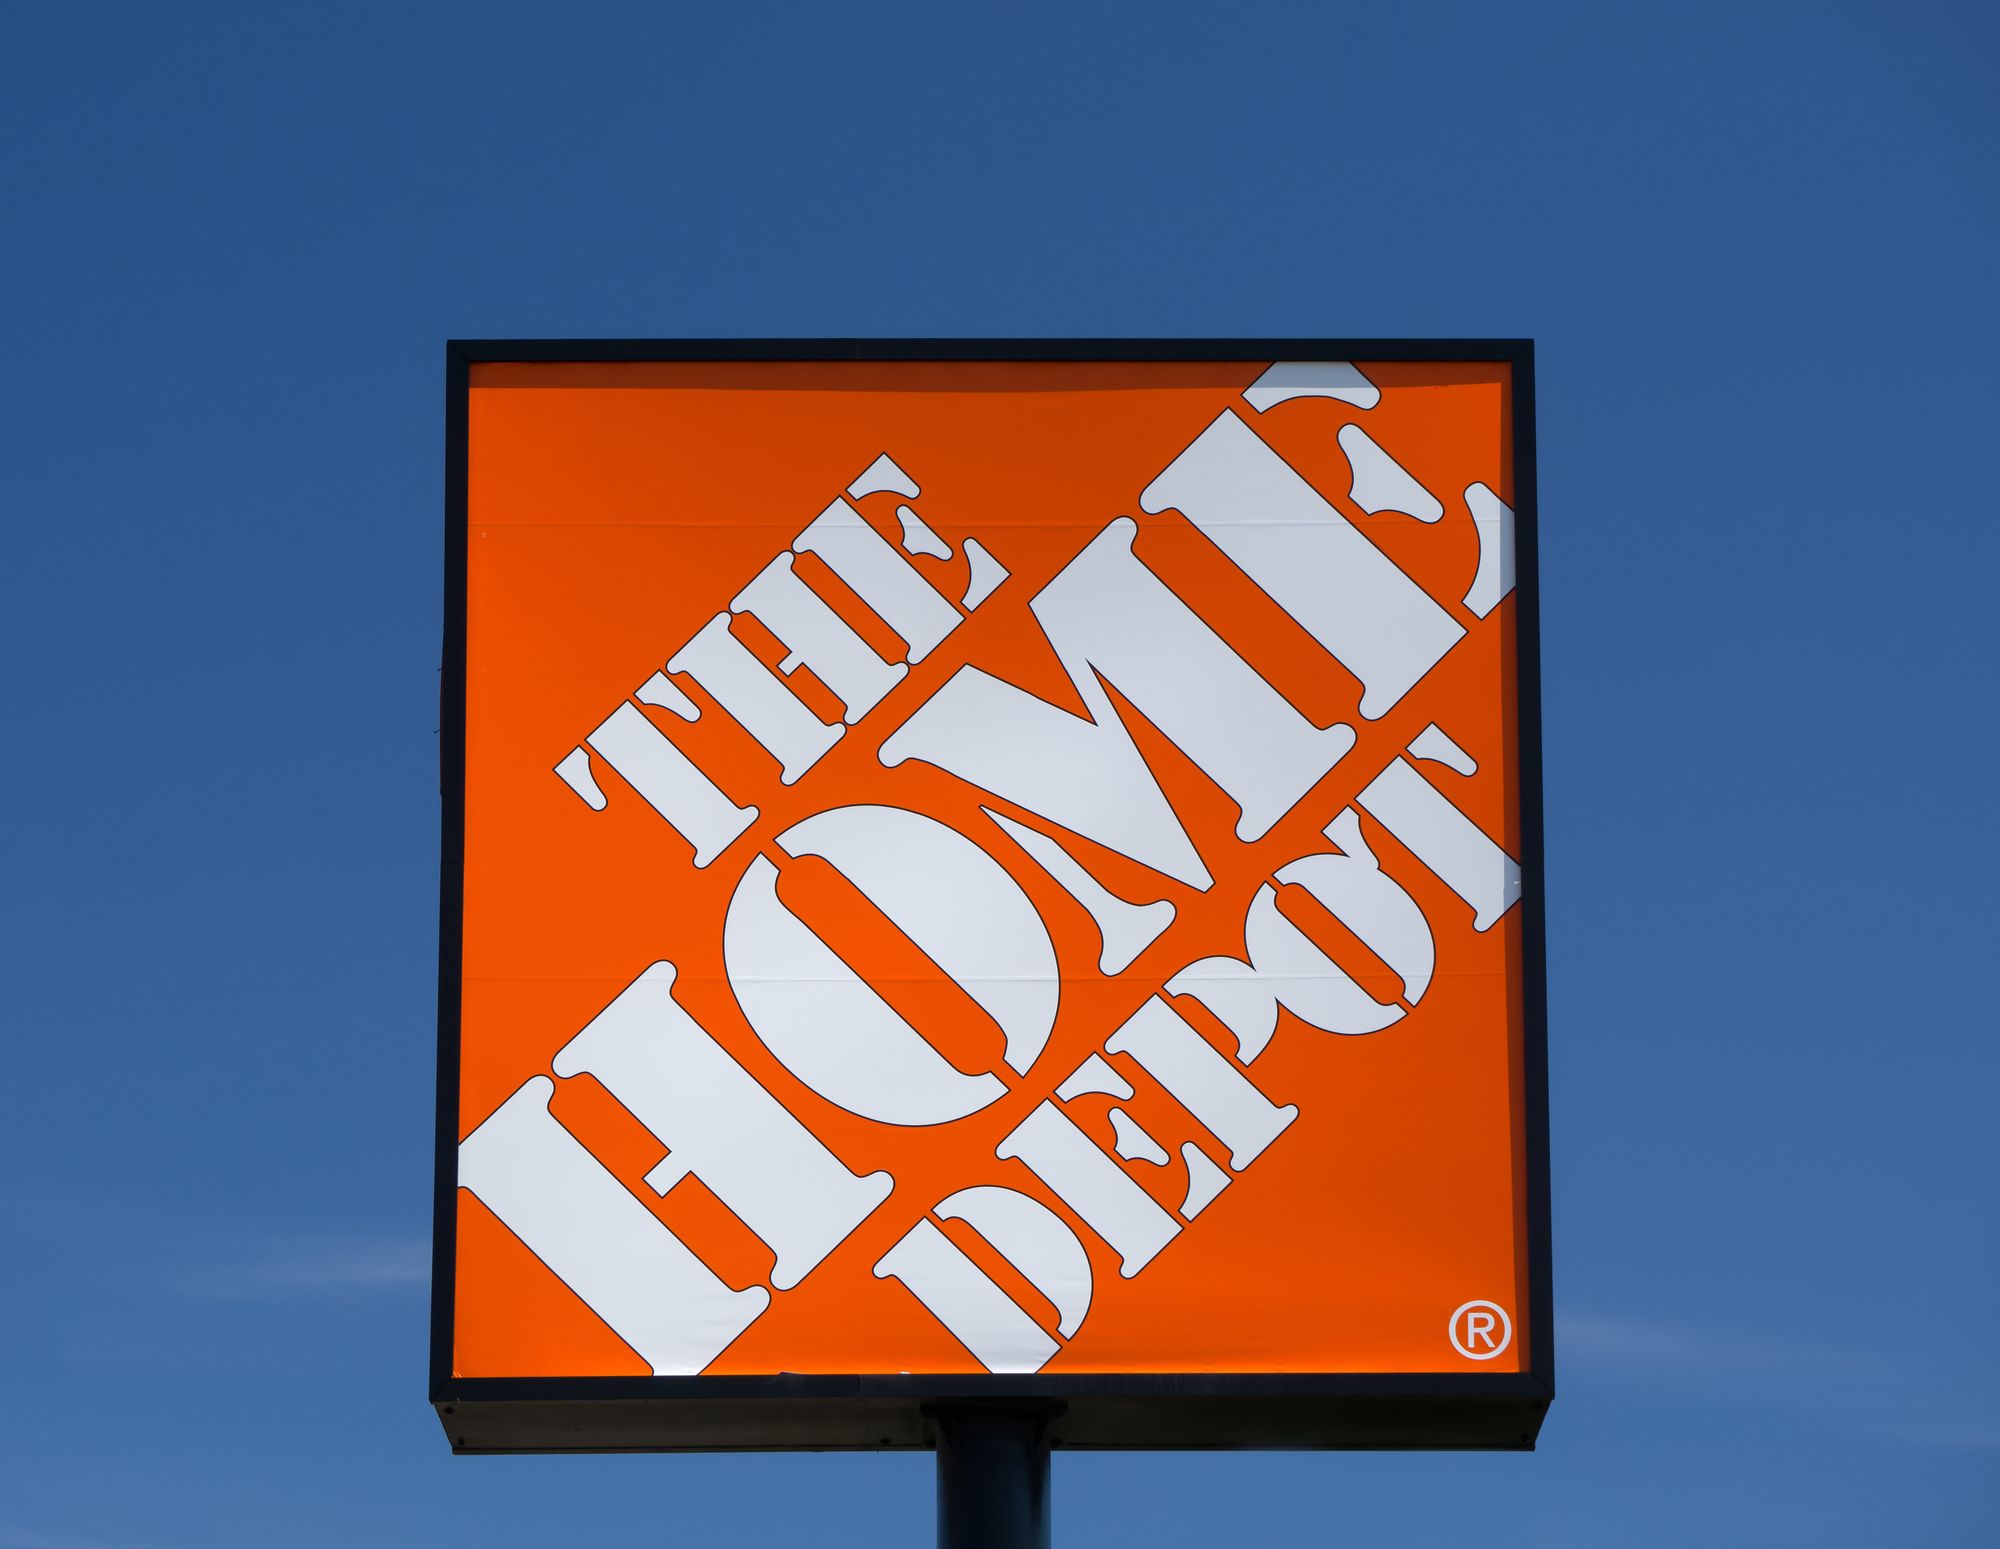 Home Depot to pay $72.5 million to settle California wage class